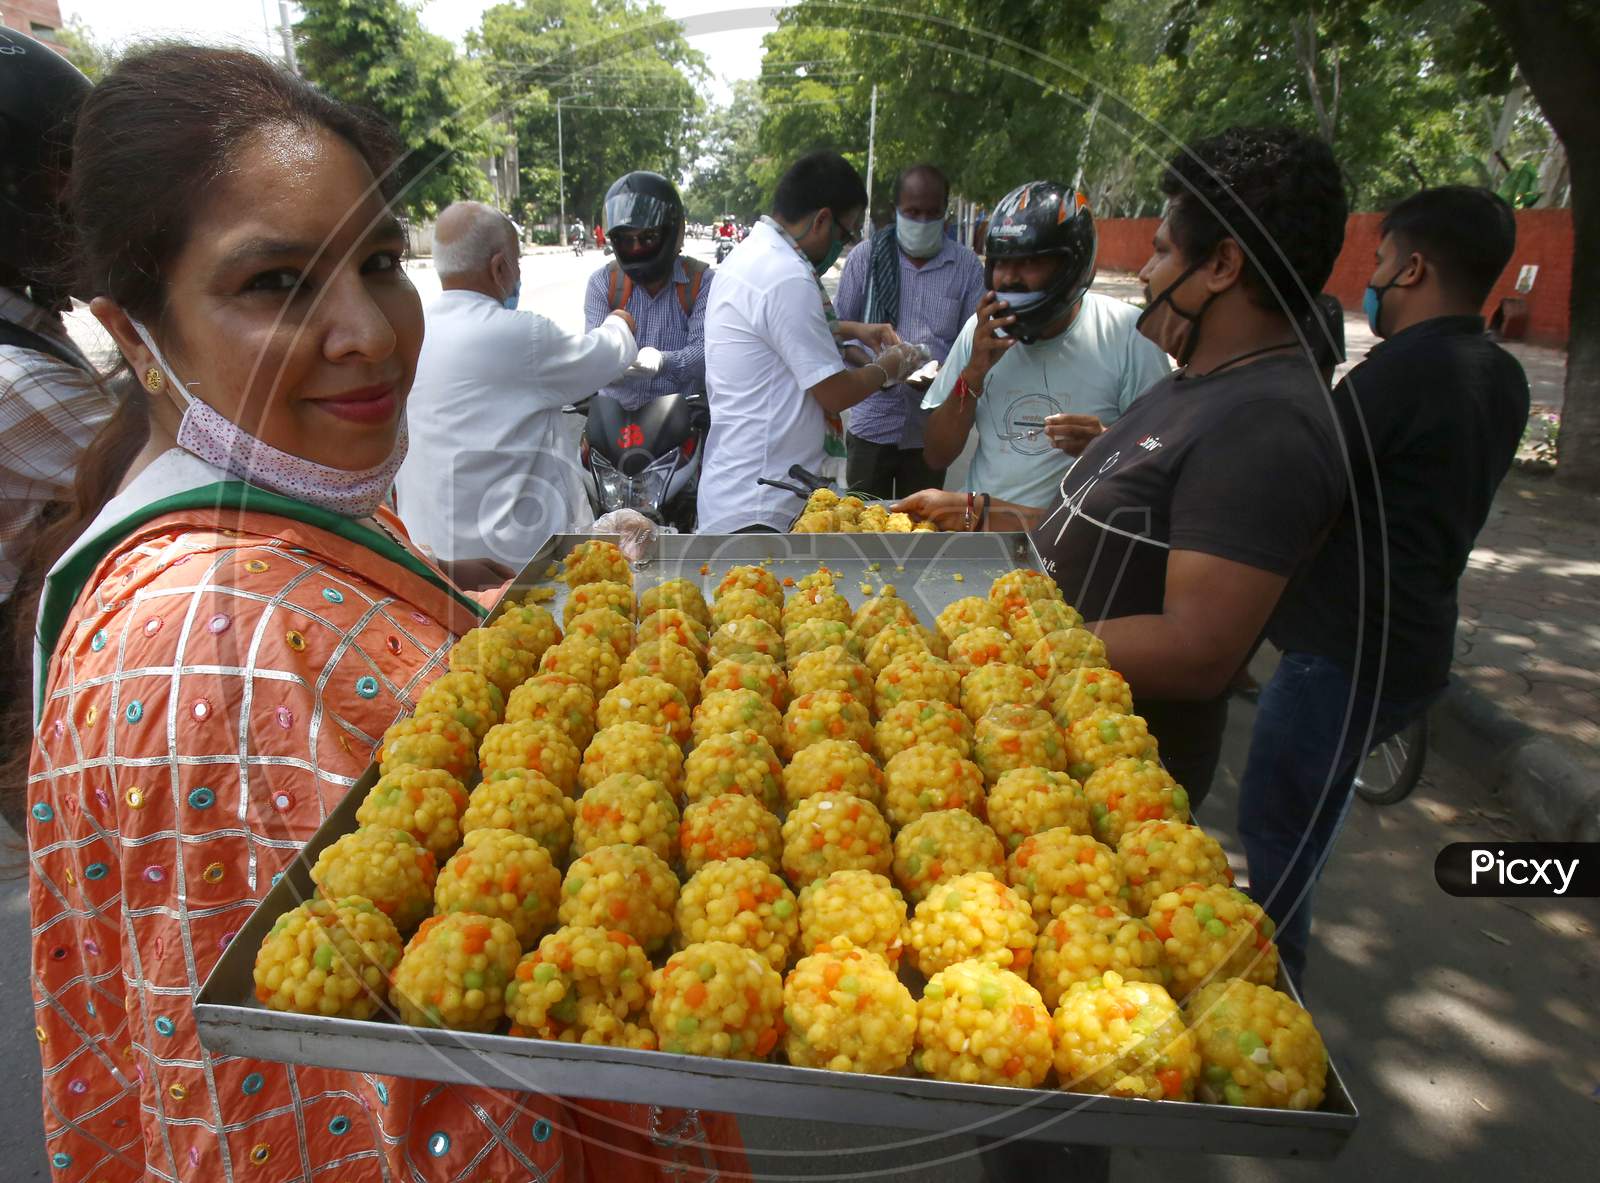 Activists of youth congress distributing sweets at a market in Chandigarh, during the celebrations of the stone laying ceremony of the Ram Temple in Ayodhya, August 5, 2020.